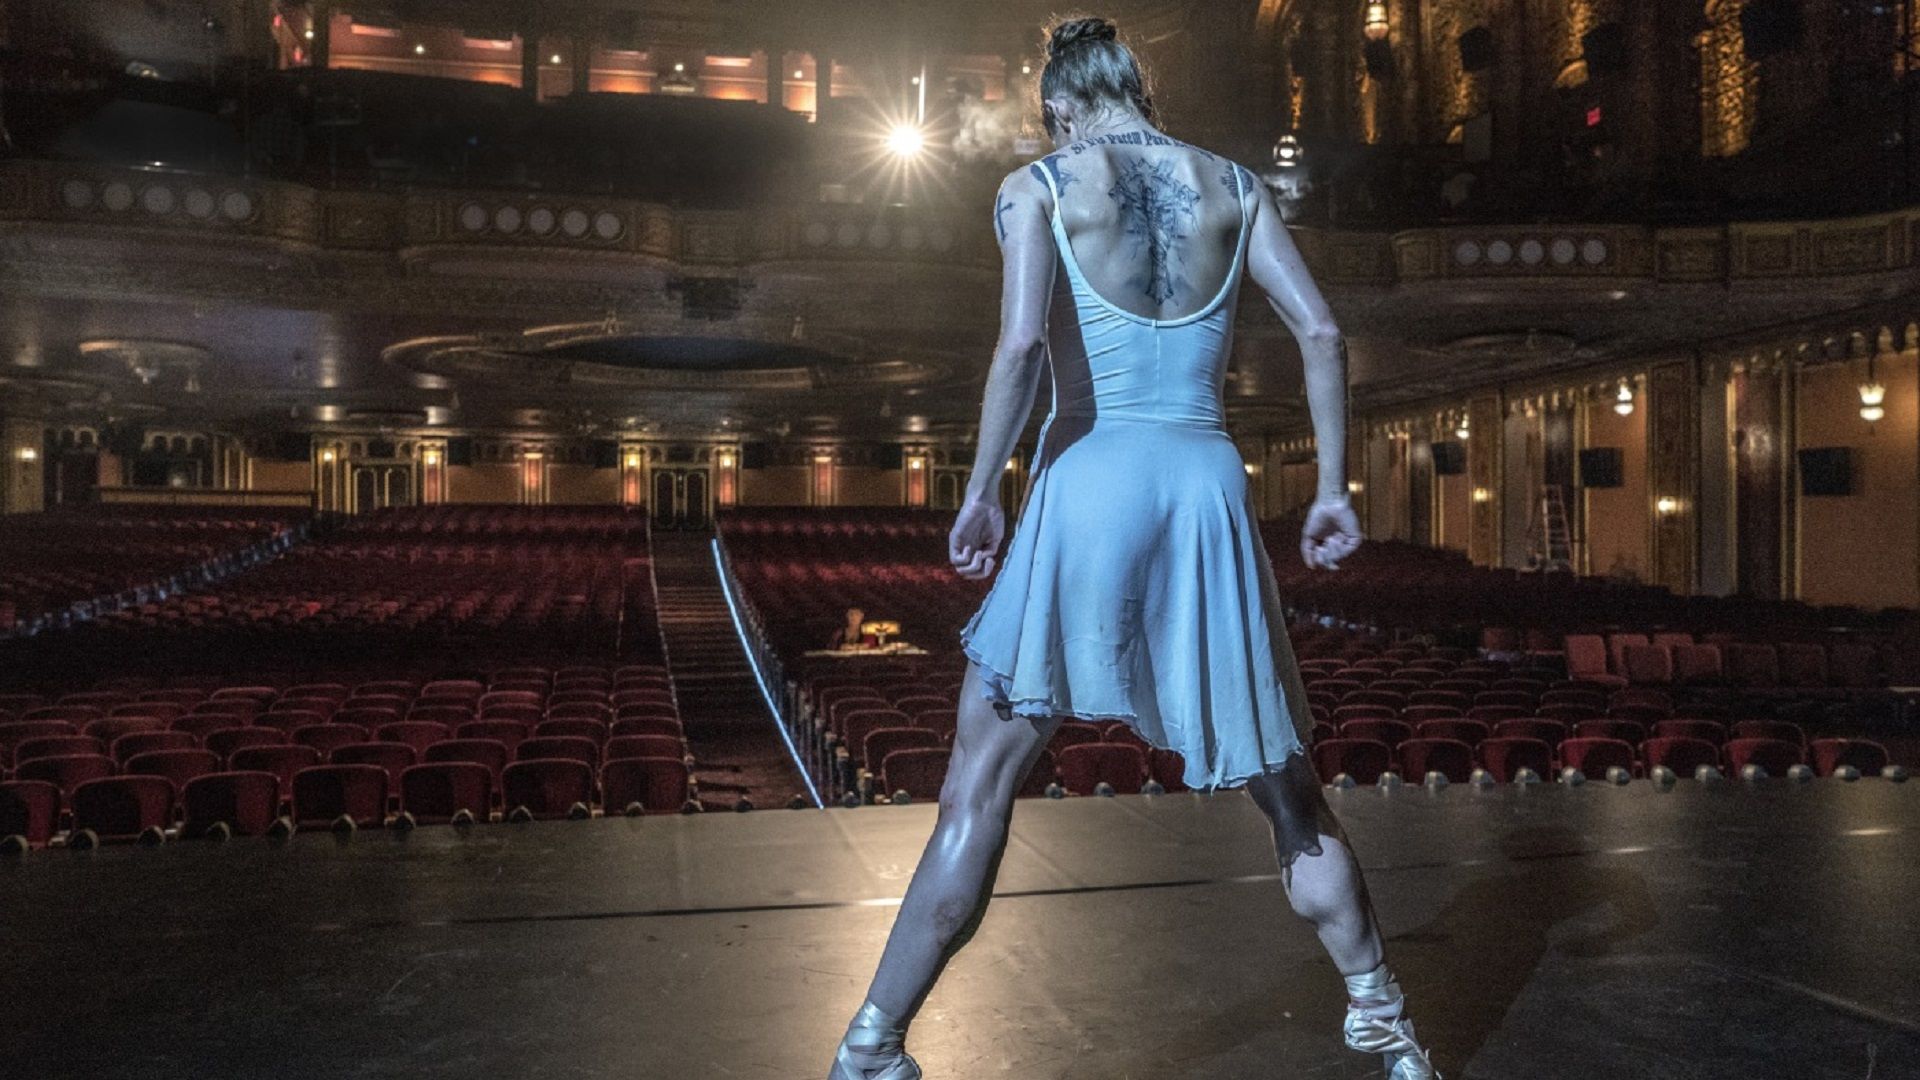 Everything To Know About The John Wick Spin-Off Film Ballerina